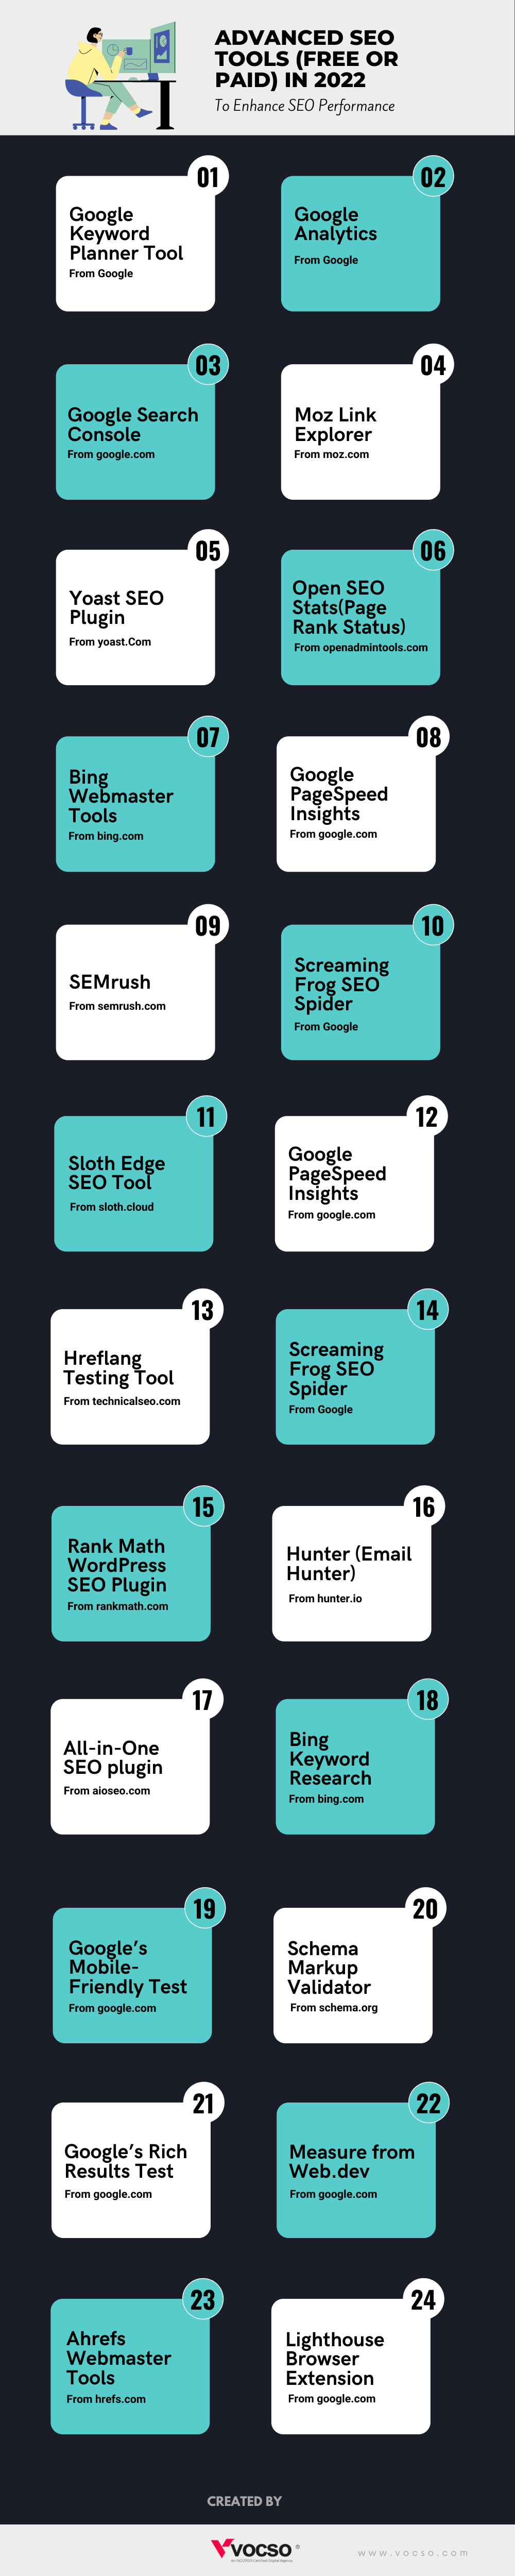  Infographic: Best Search Engine Optimization (SEO) Tools 